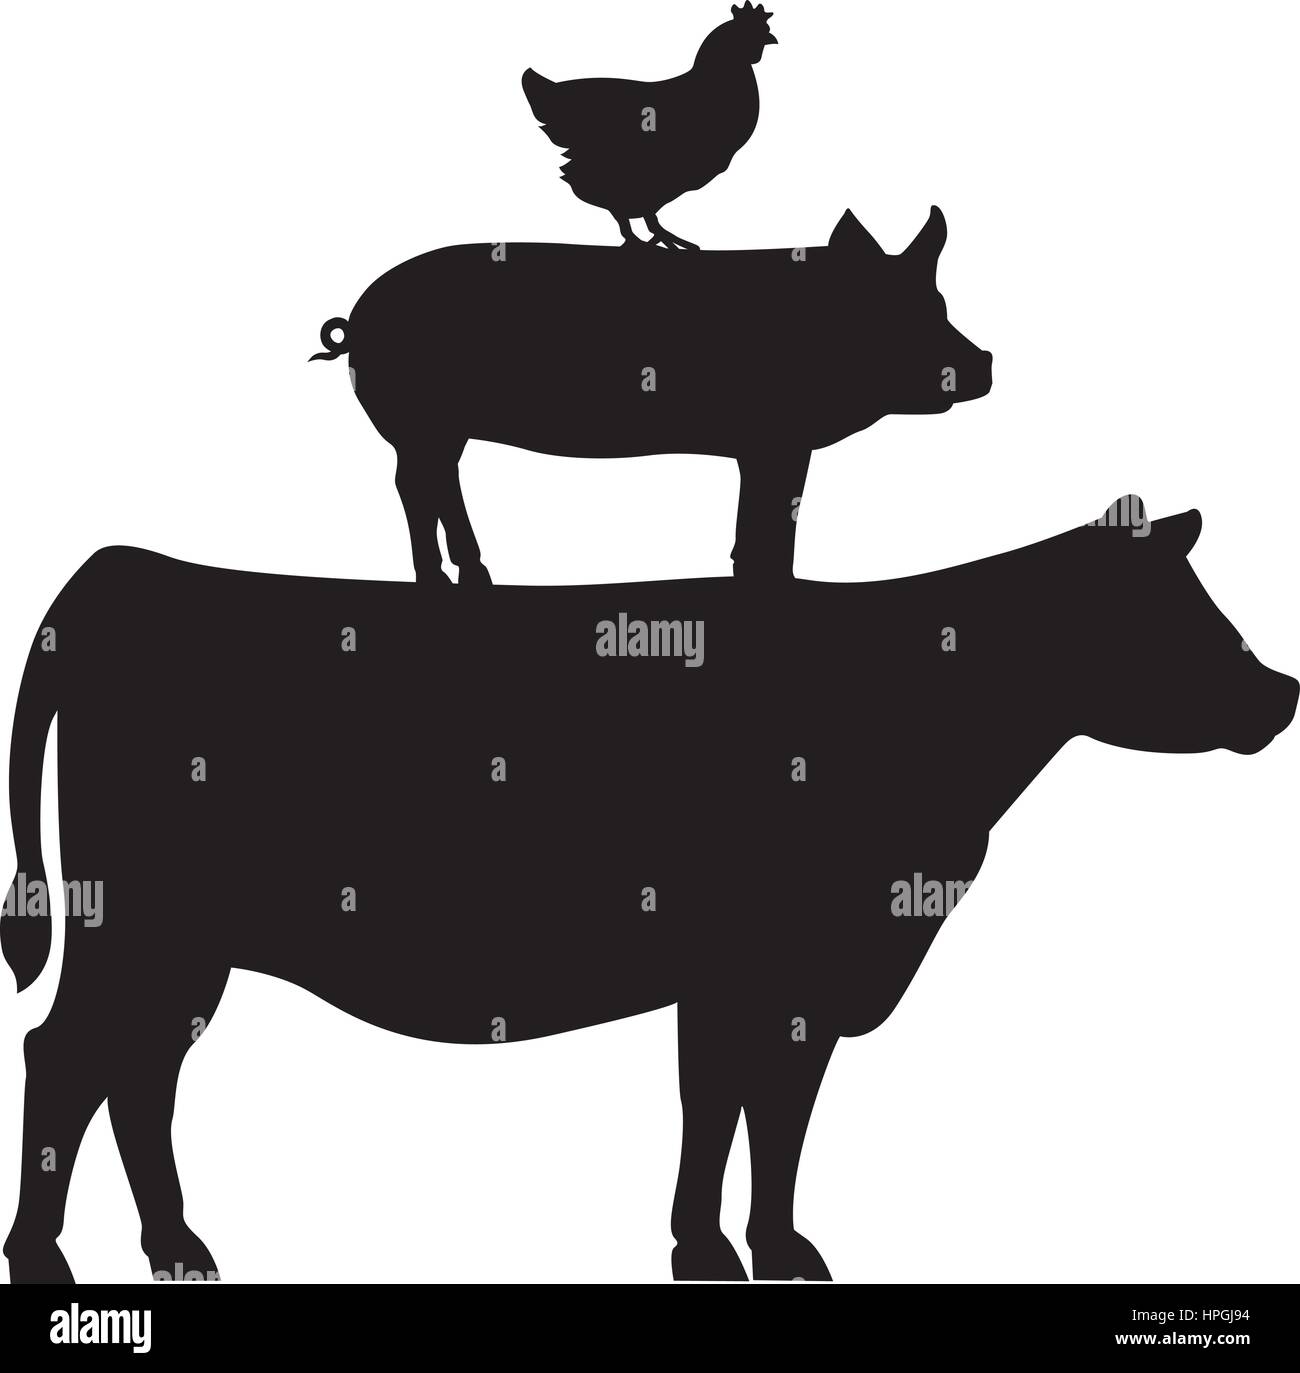 Chicken, pig and cow stacked. Stock Vector